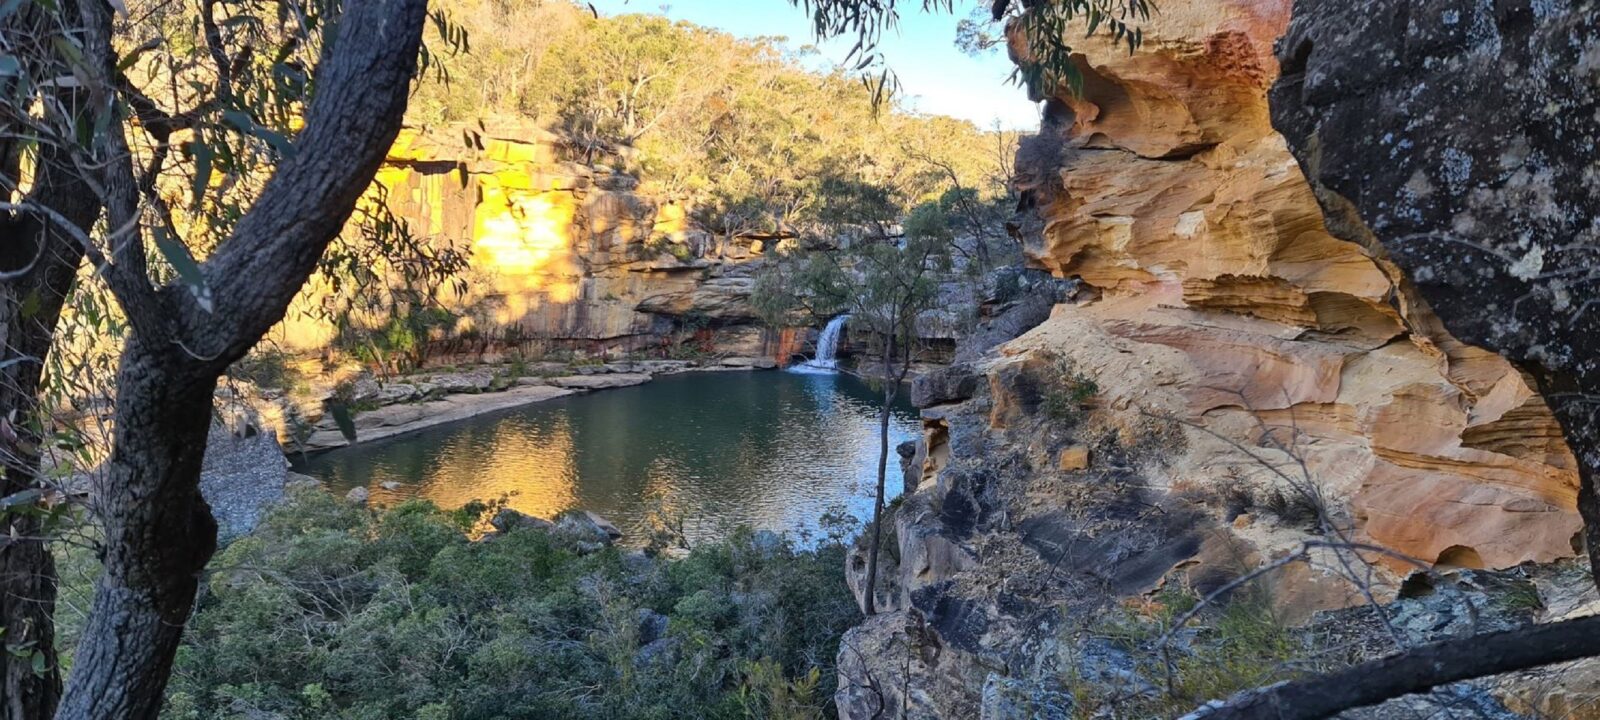 picture of water hole in Macarthur region new south wales